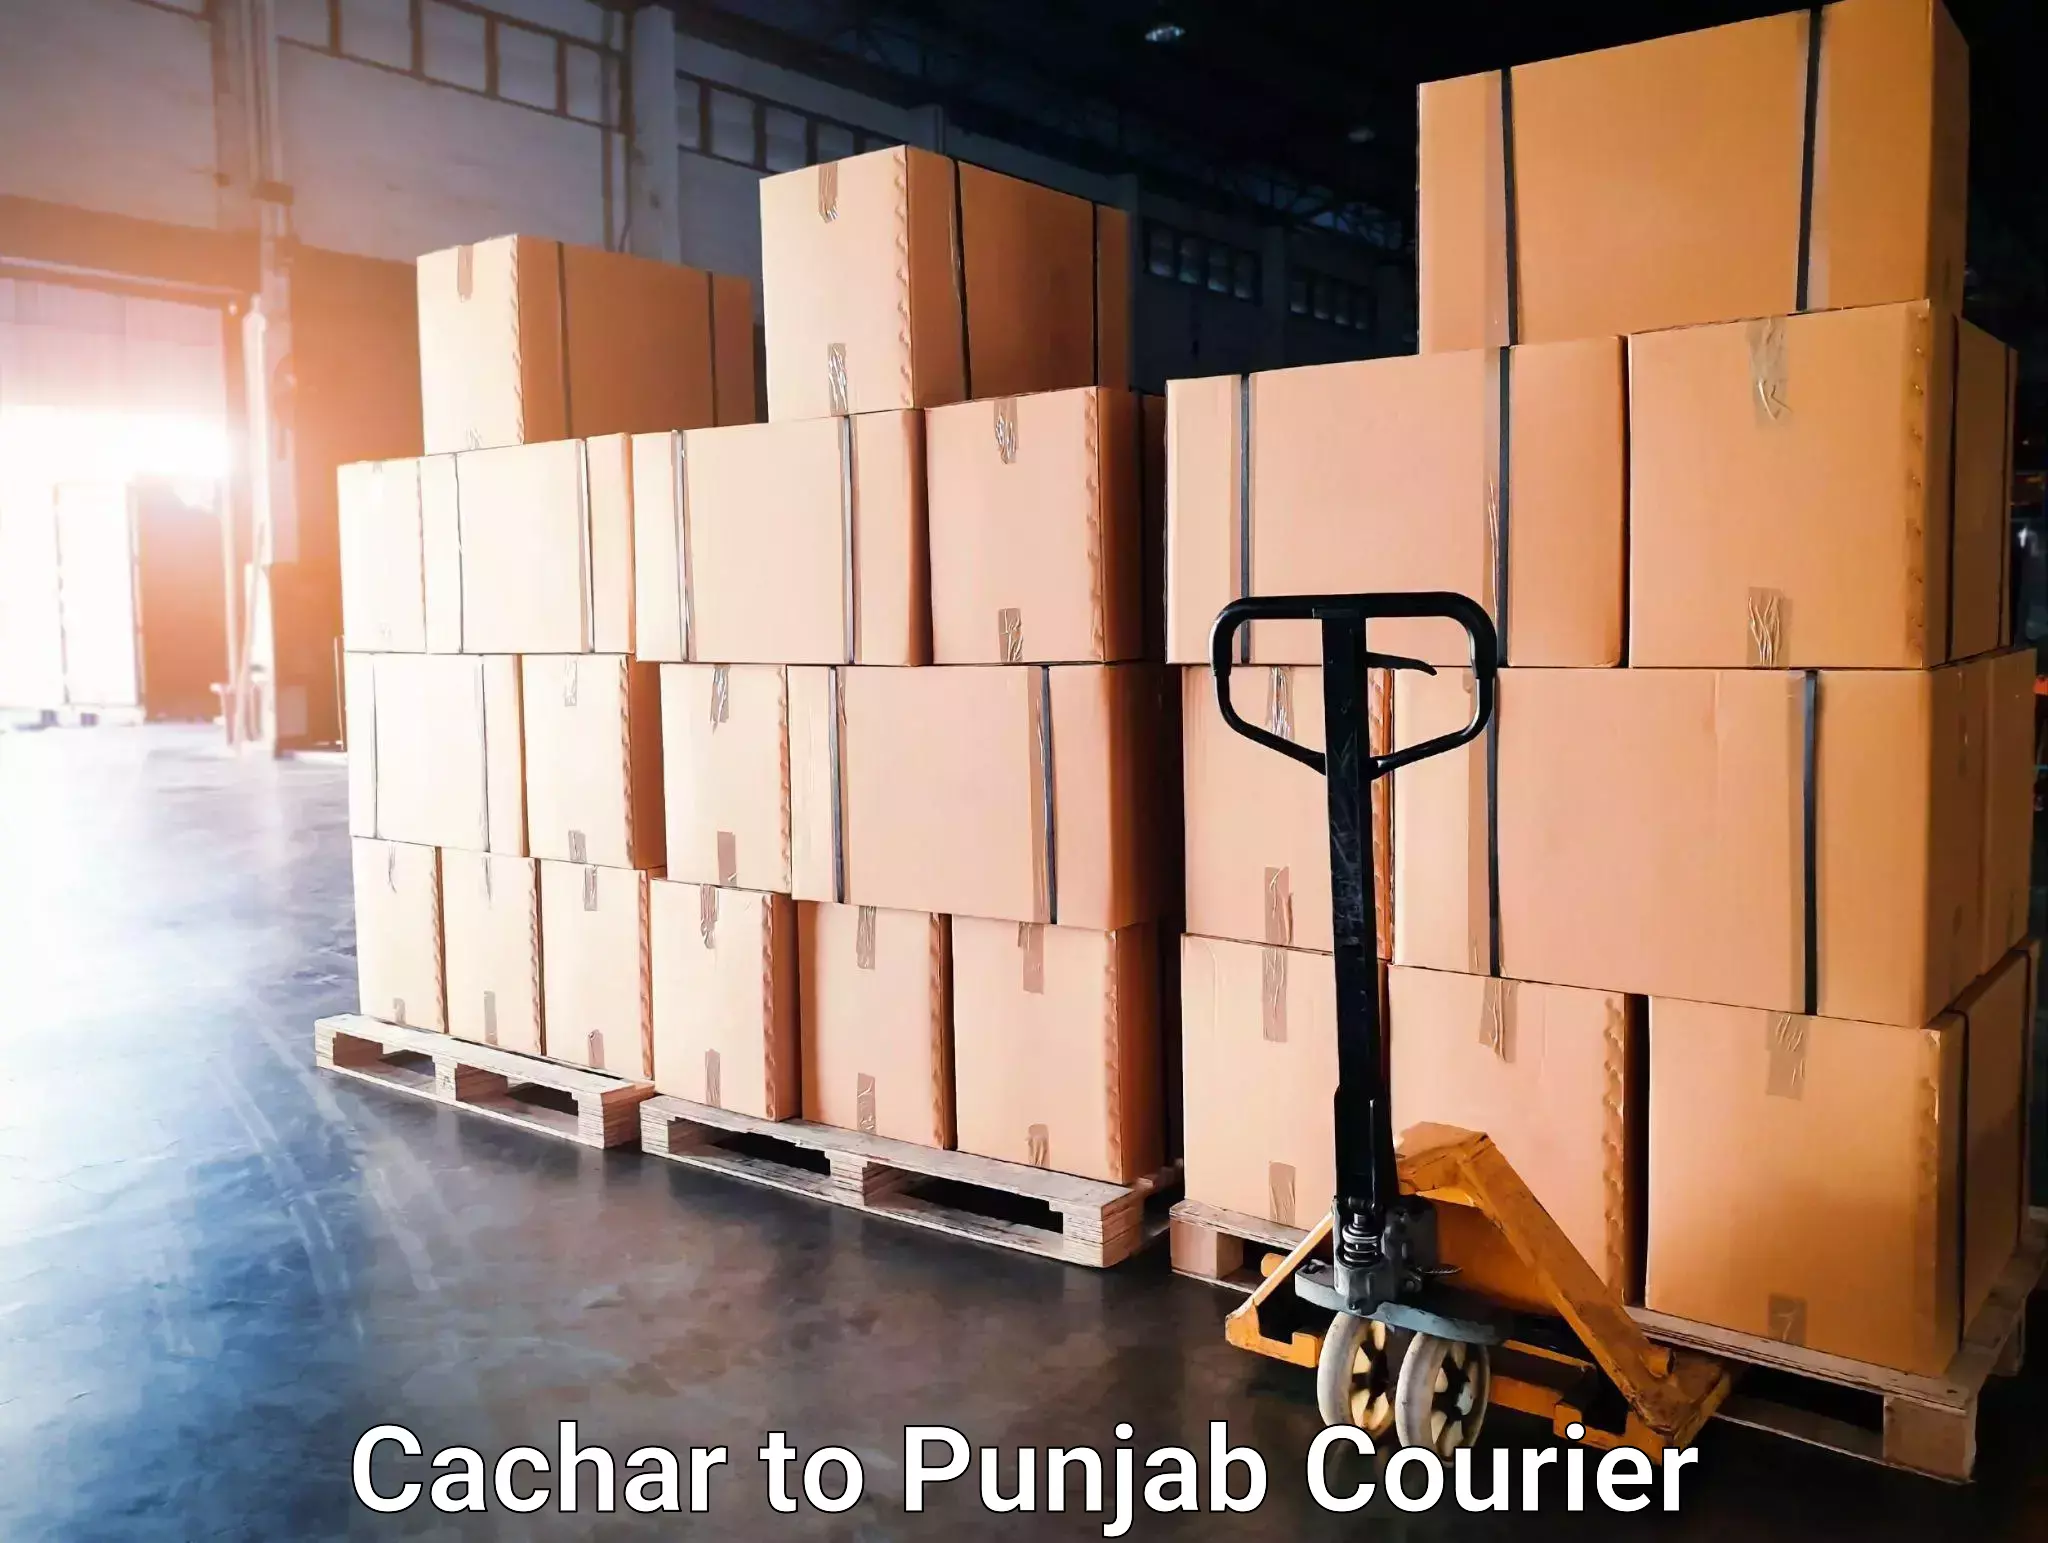 High-quality delivery services Cachar to Ropar